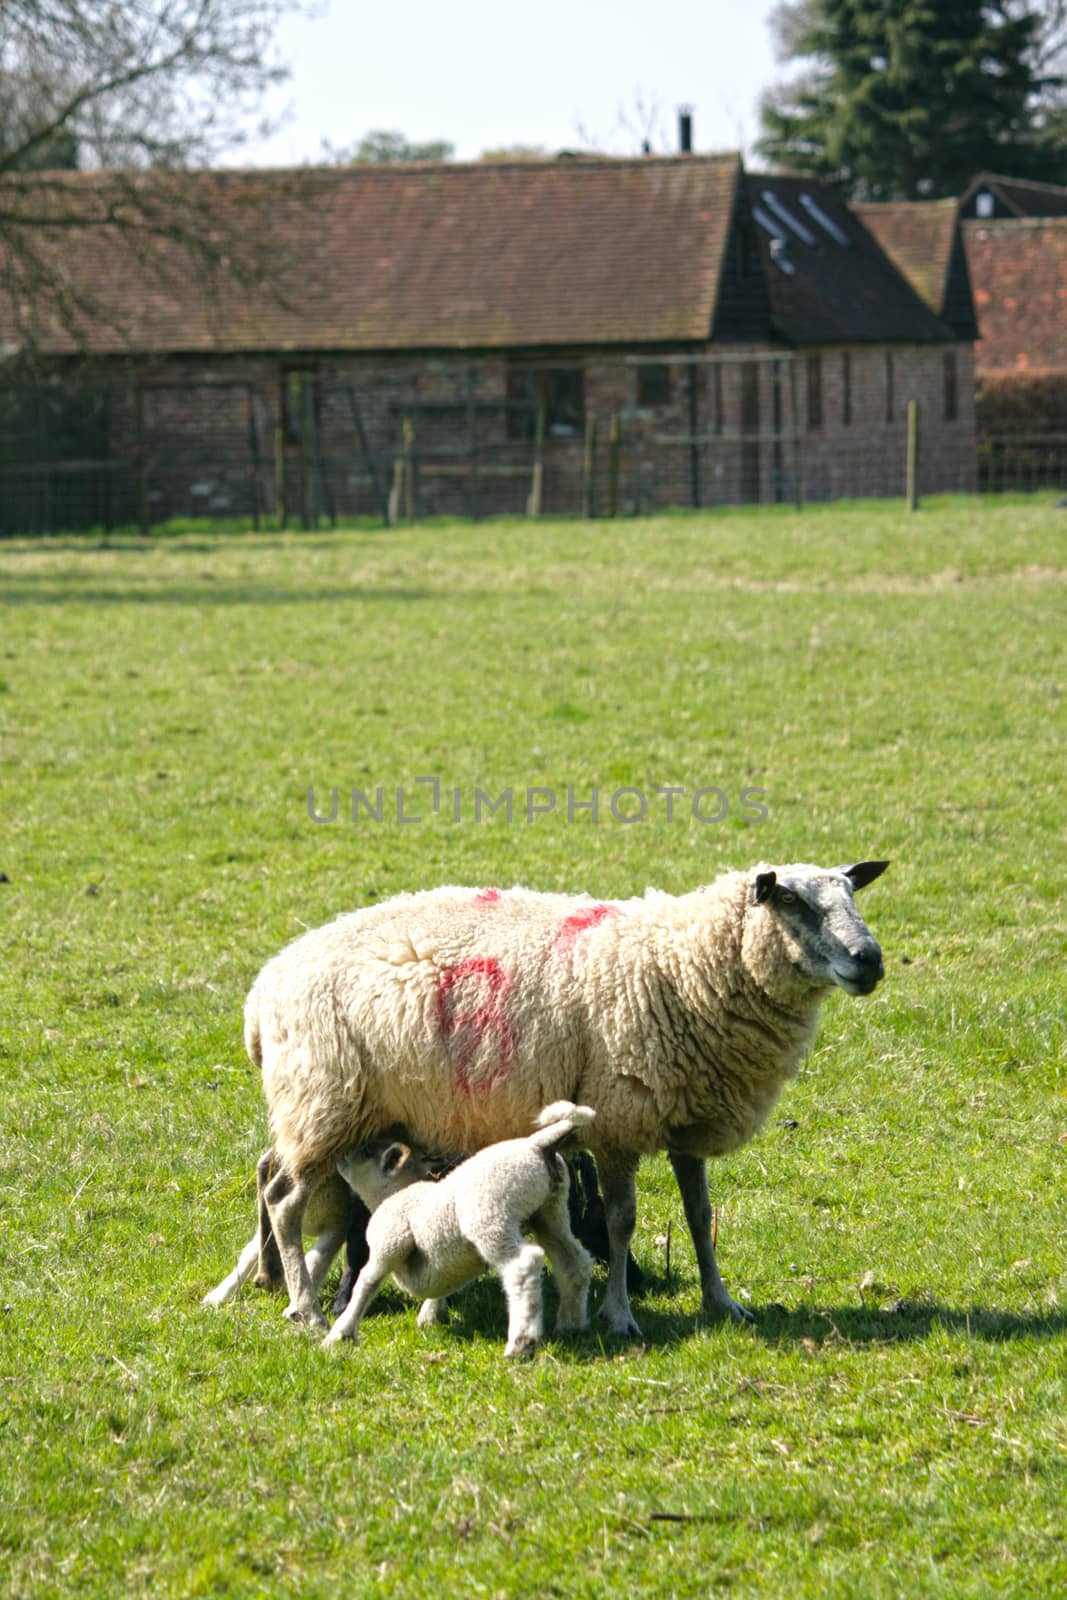 Spring lambs feeding with the mother sheep.